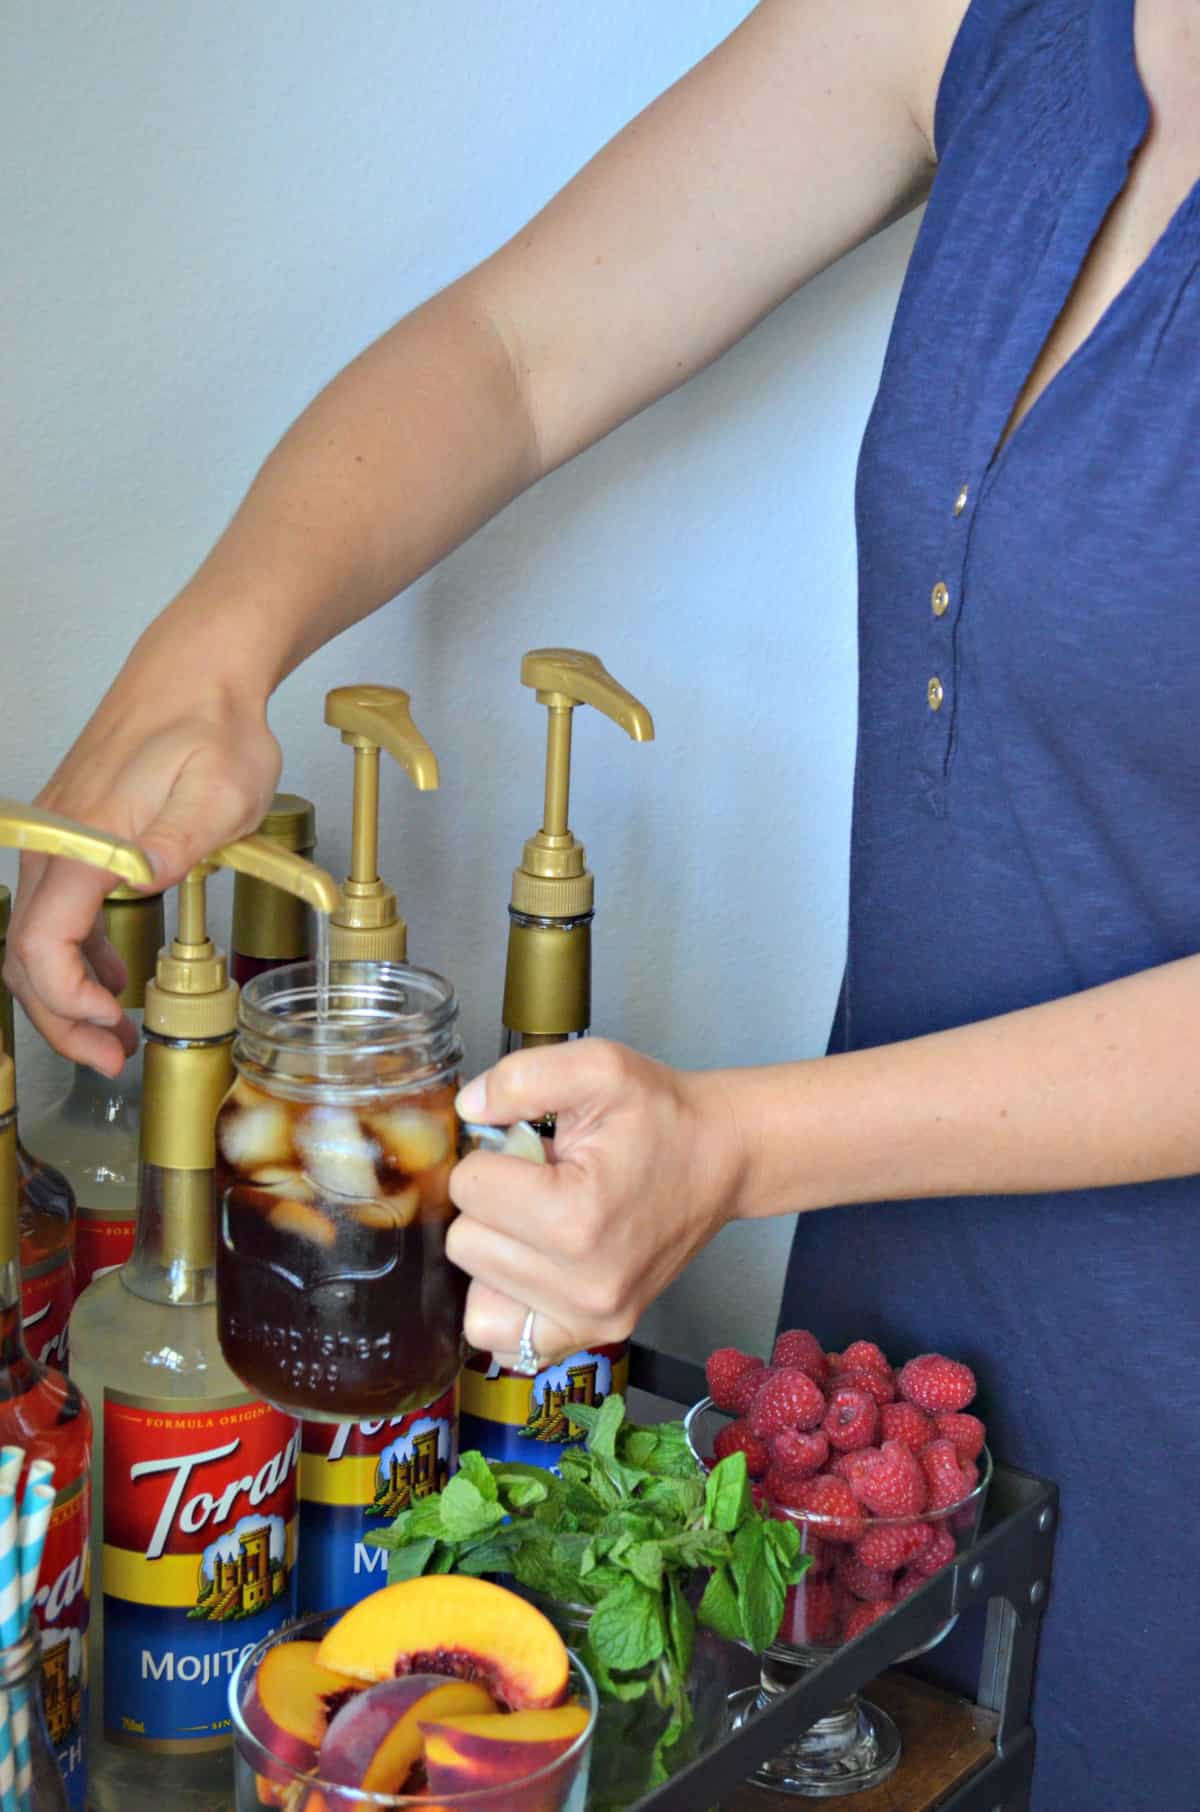 female hand pumping mojito syrup into iced tea on bar cart that has mint, strawberry, and peaches.